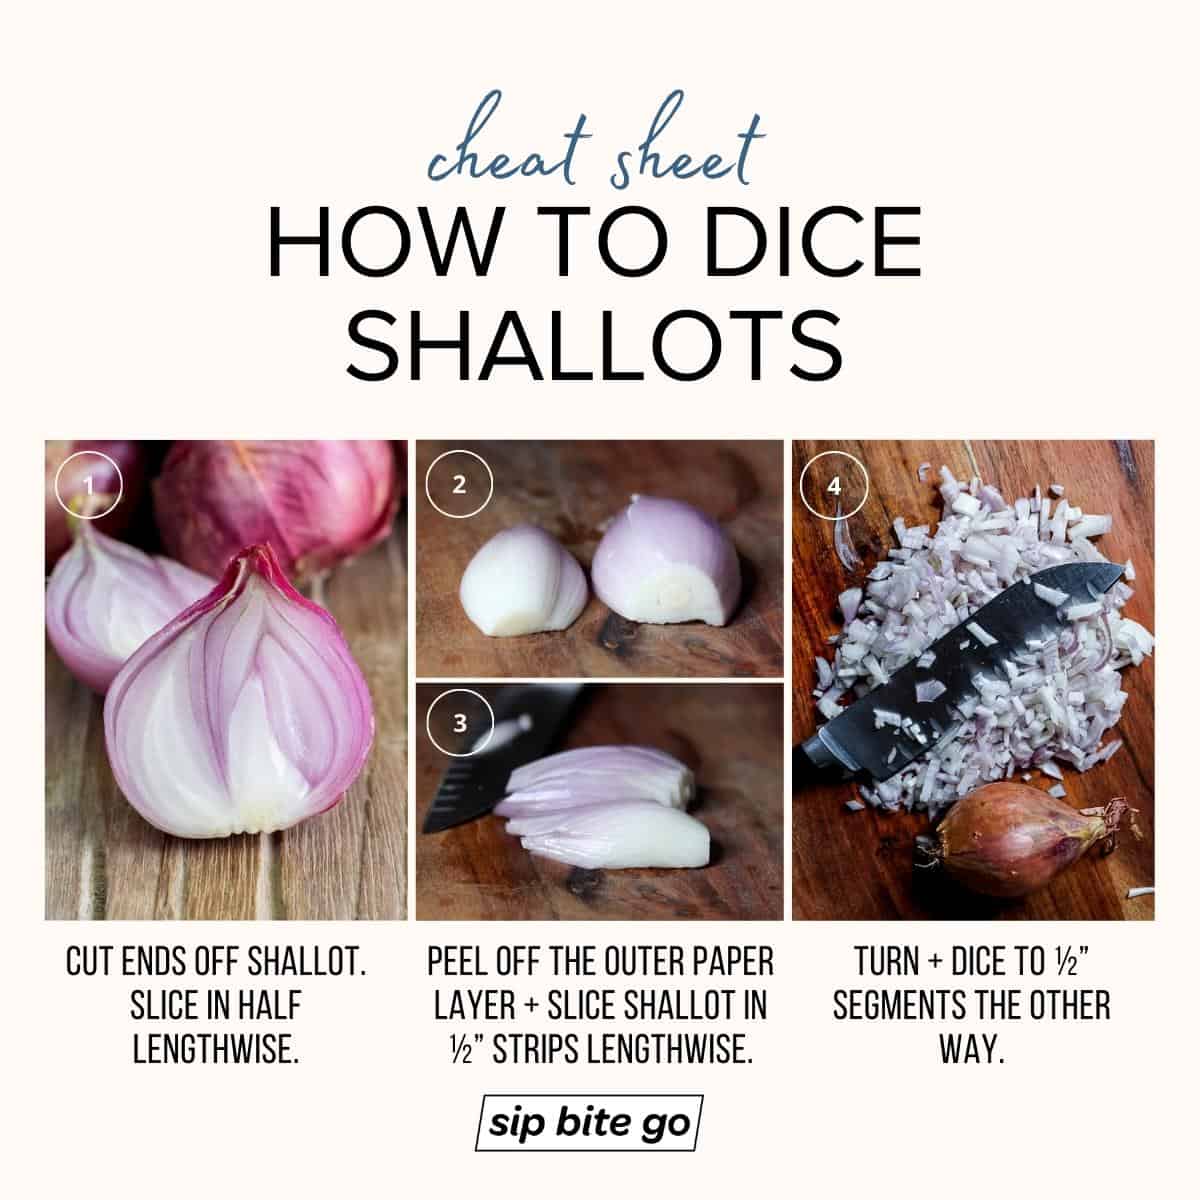 Infographic demonstrating How to dice shallots for caramelizing them